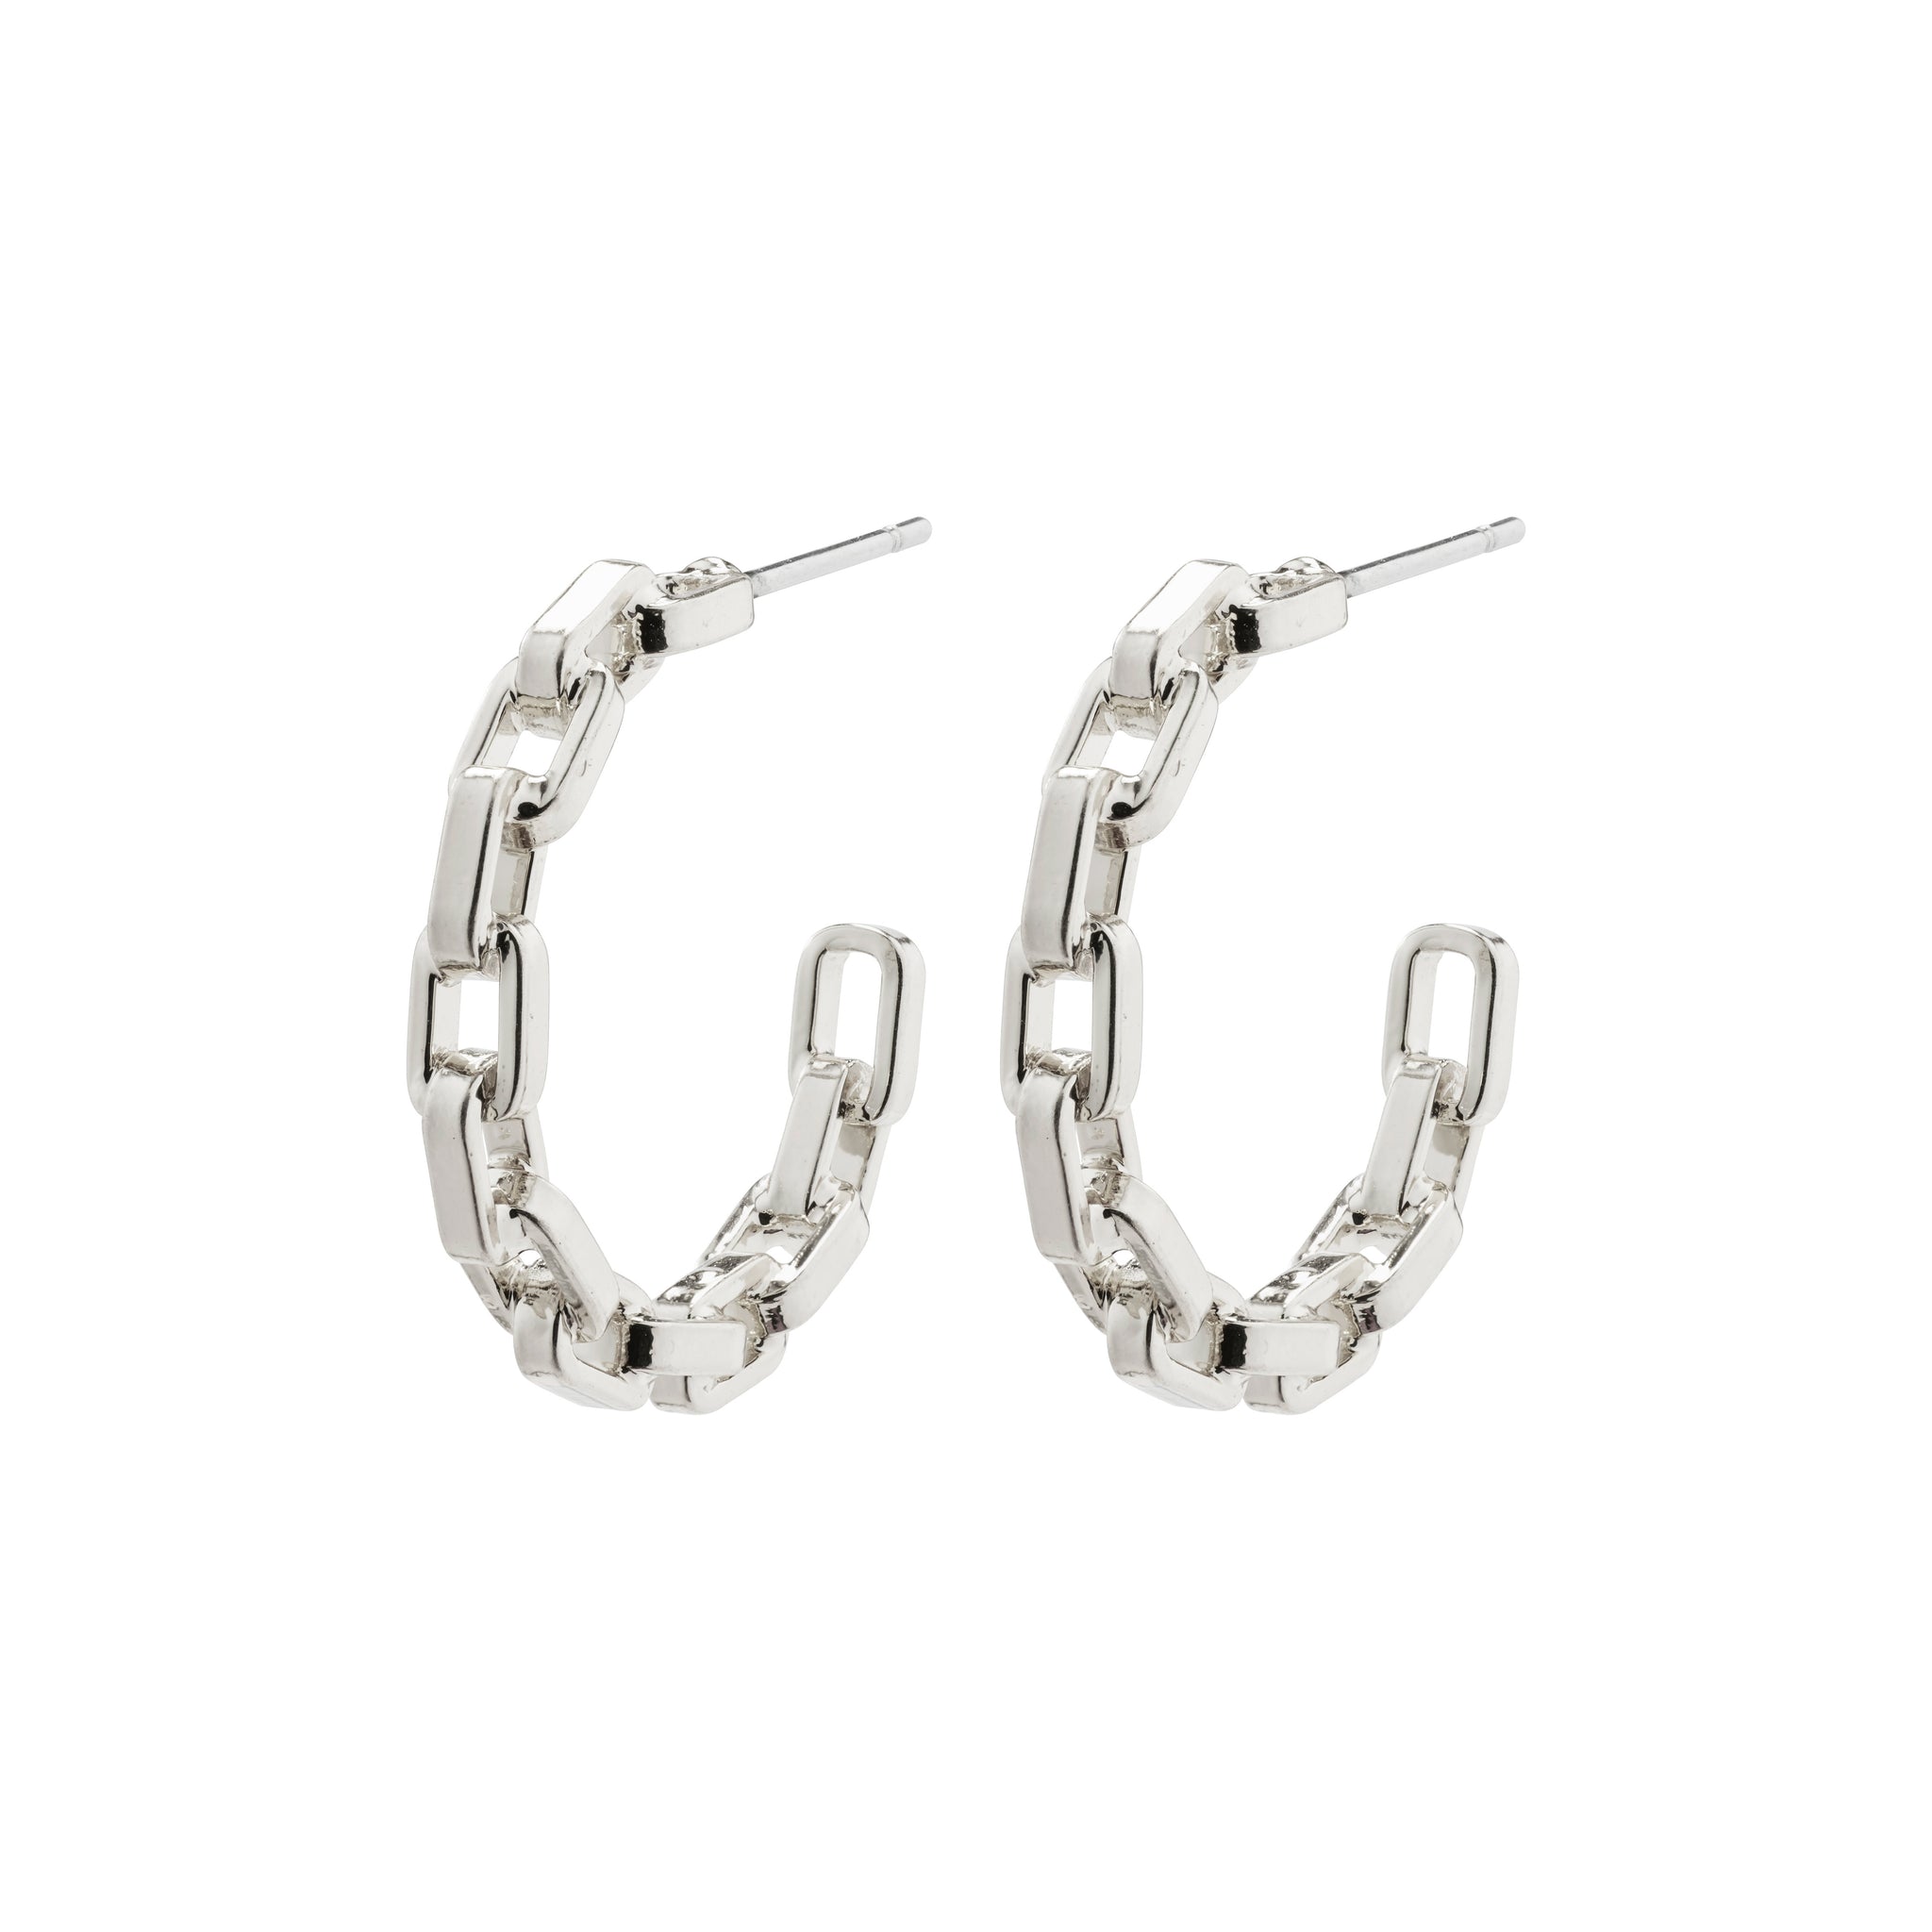 Eira Earrings - Silver Plated